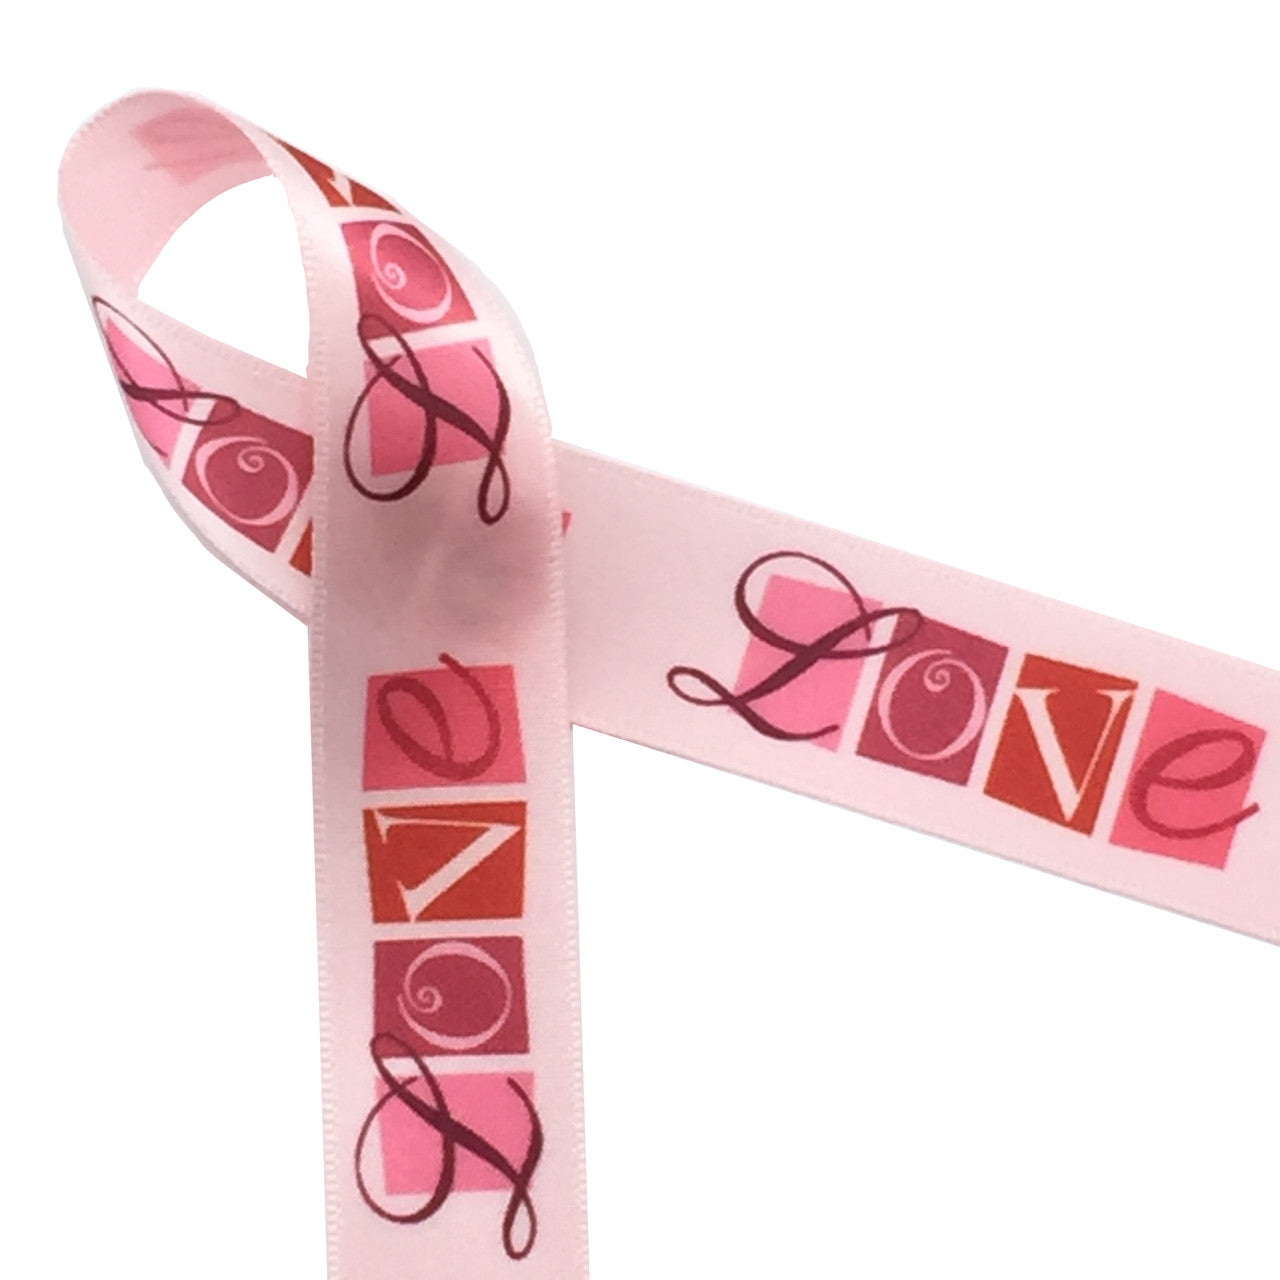 Valentine ribbon pink and red hearts tossed on 7/8 white satin, 10 yards